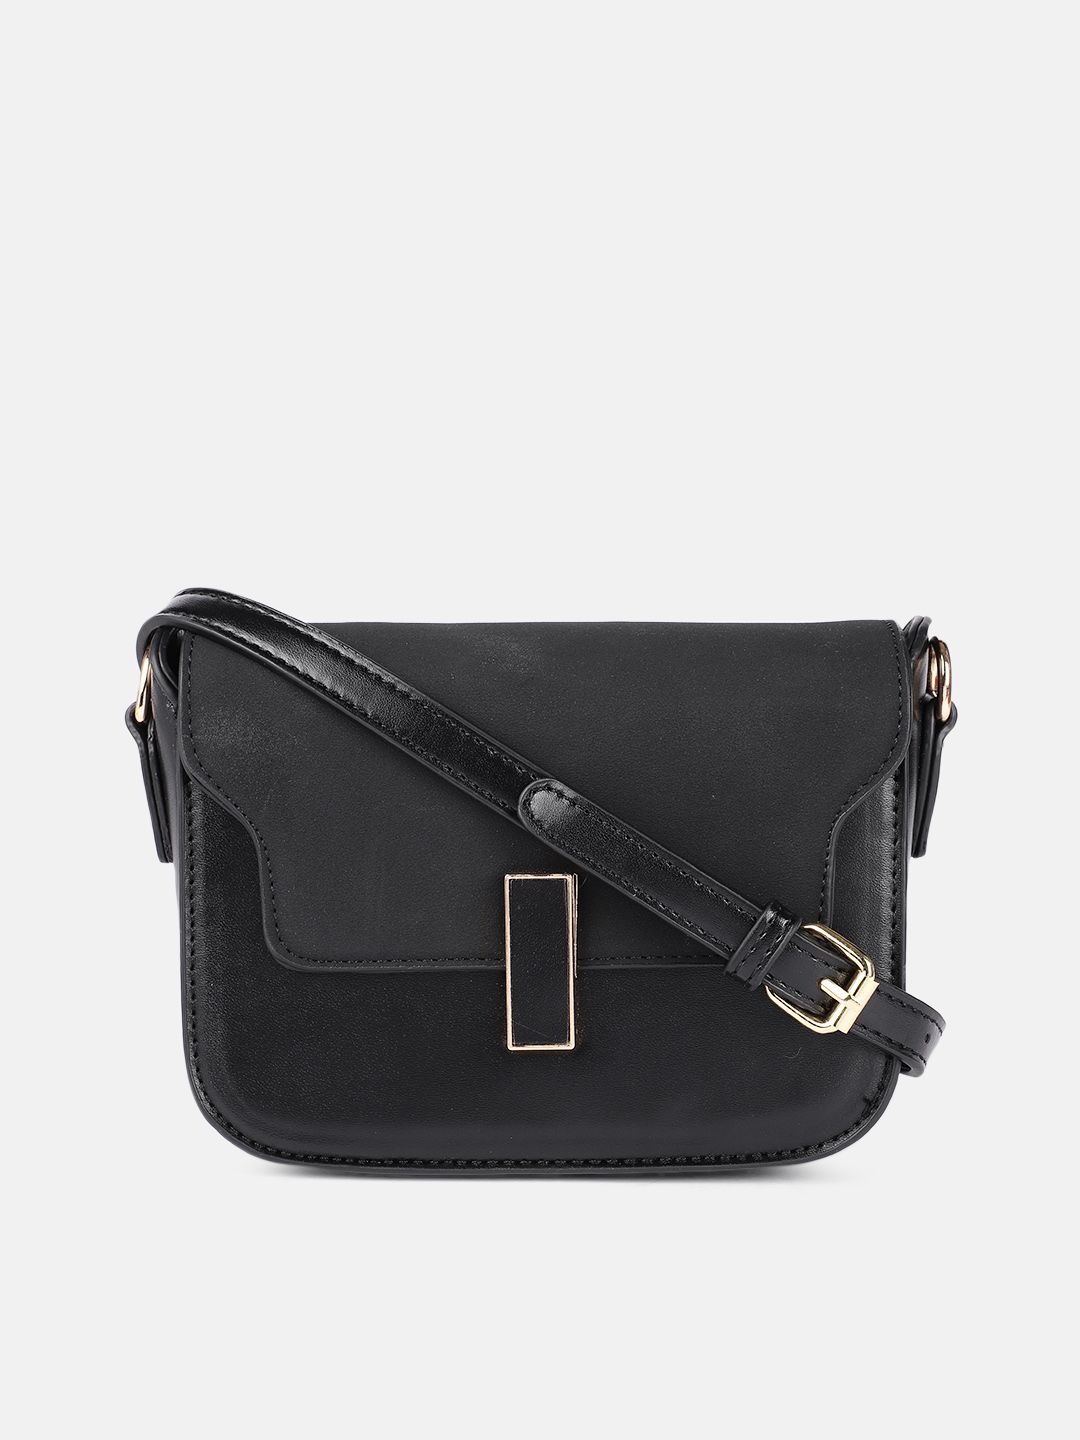 DressBerry Black Structured Sling Bag Price in India